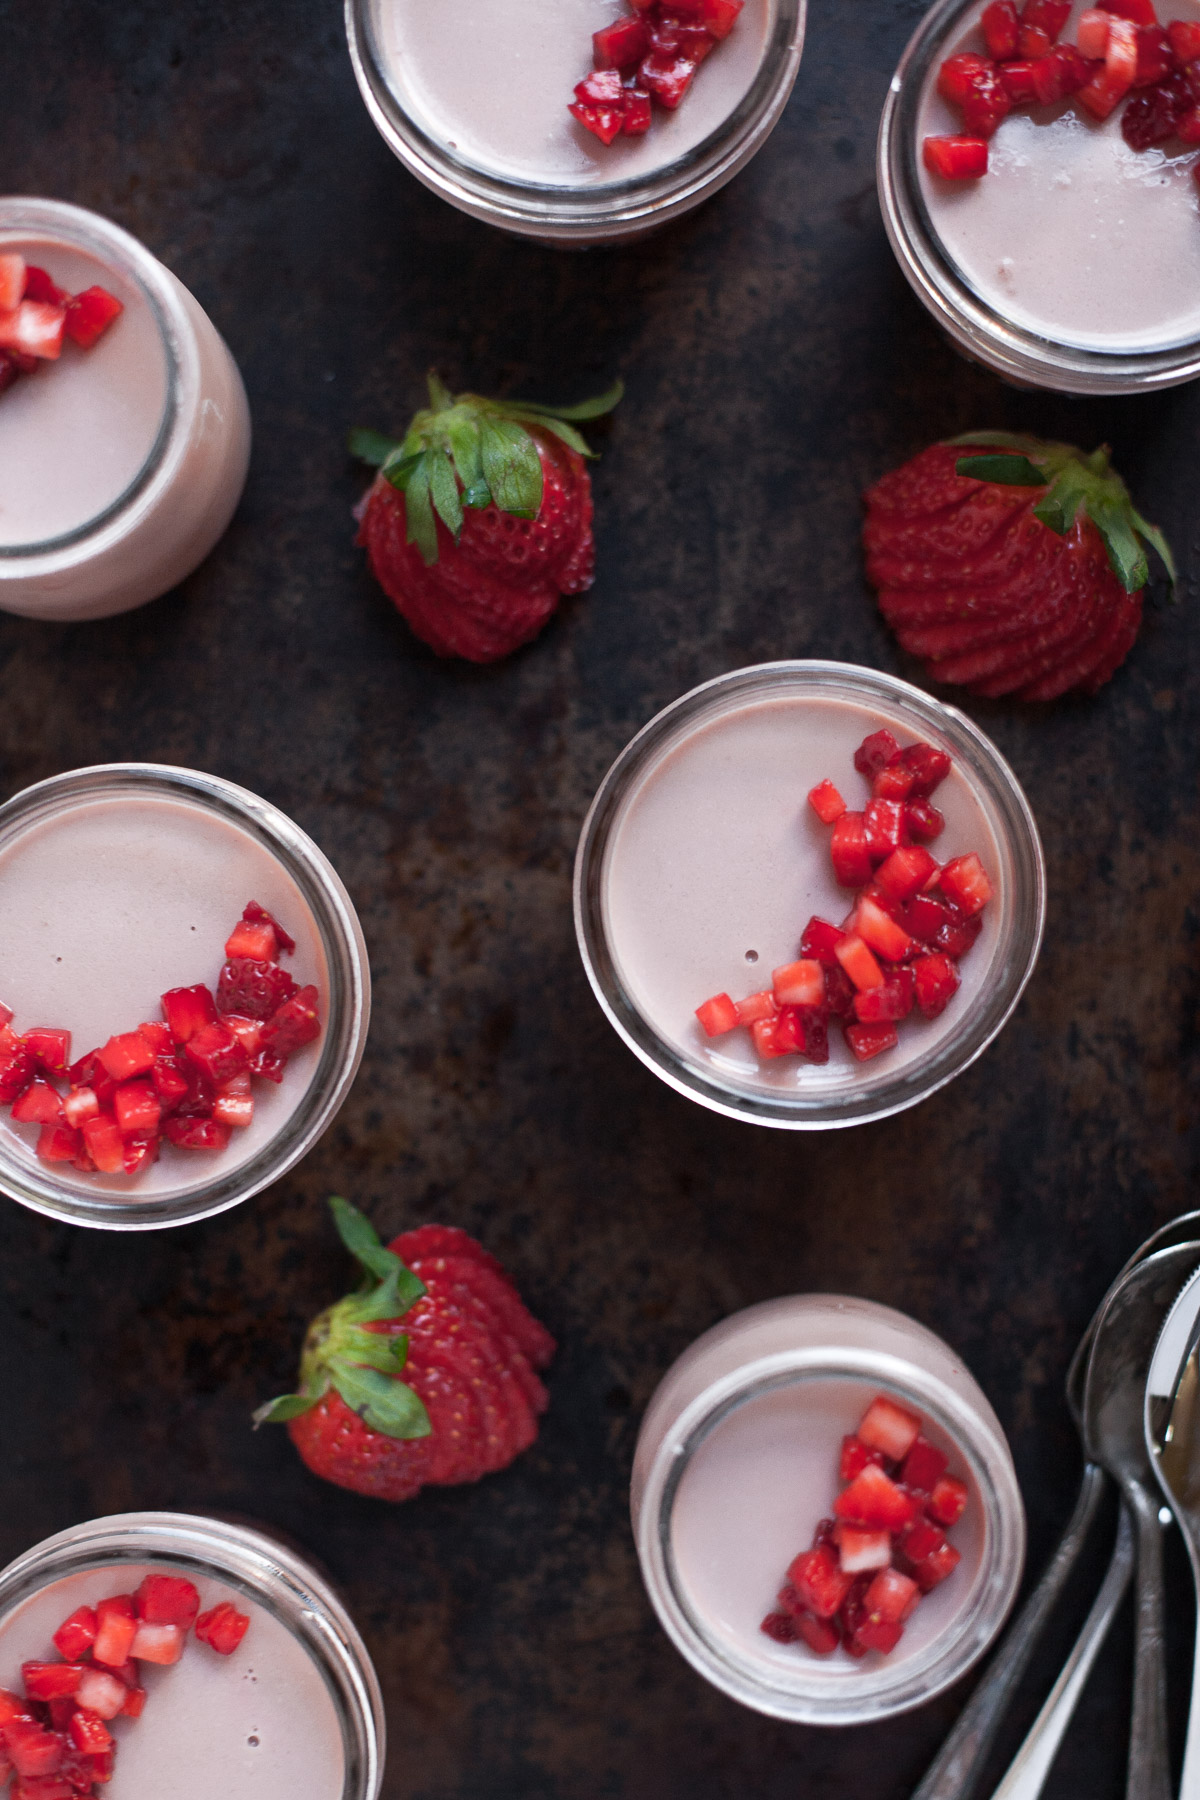 Strawberry Panna Cotta with Balsamic Vinegar (Paleo and dairy-free options)